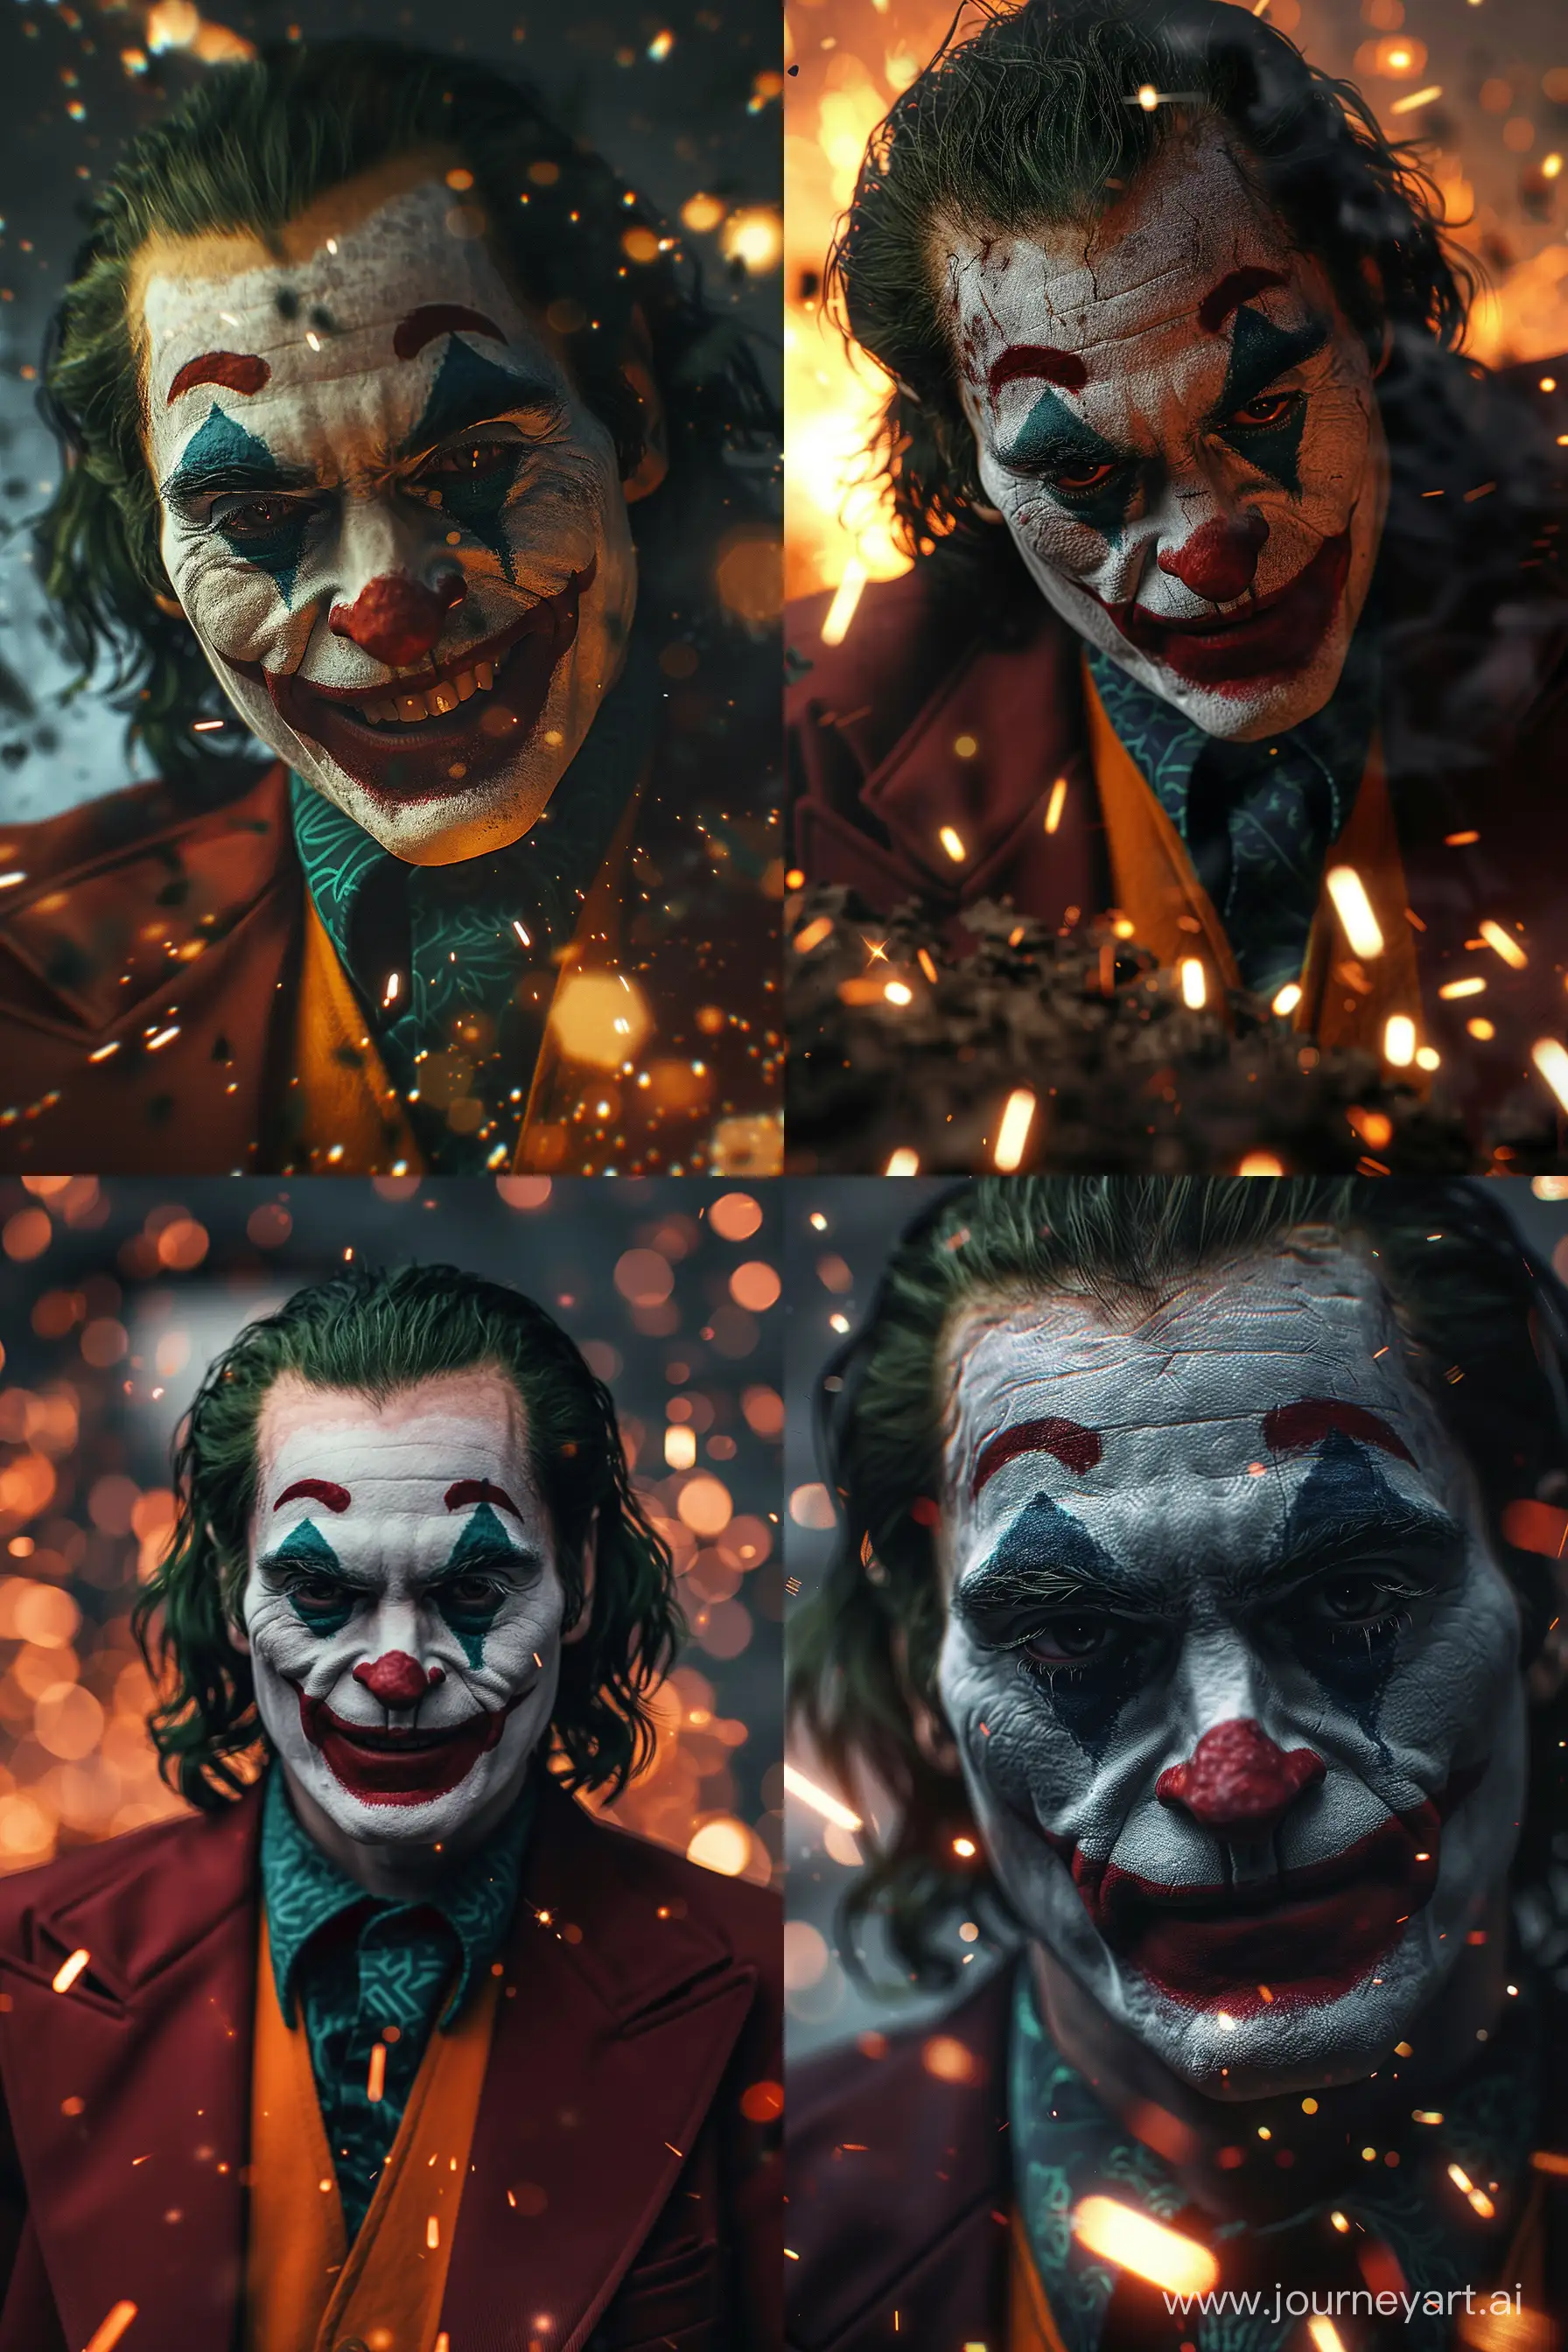 Joker-Emerges-from-Ashes-in-Epic-Photorealistic-Cinematic-Frame